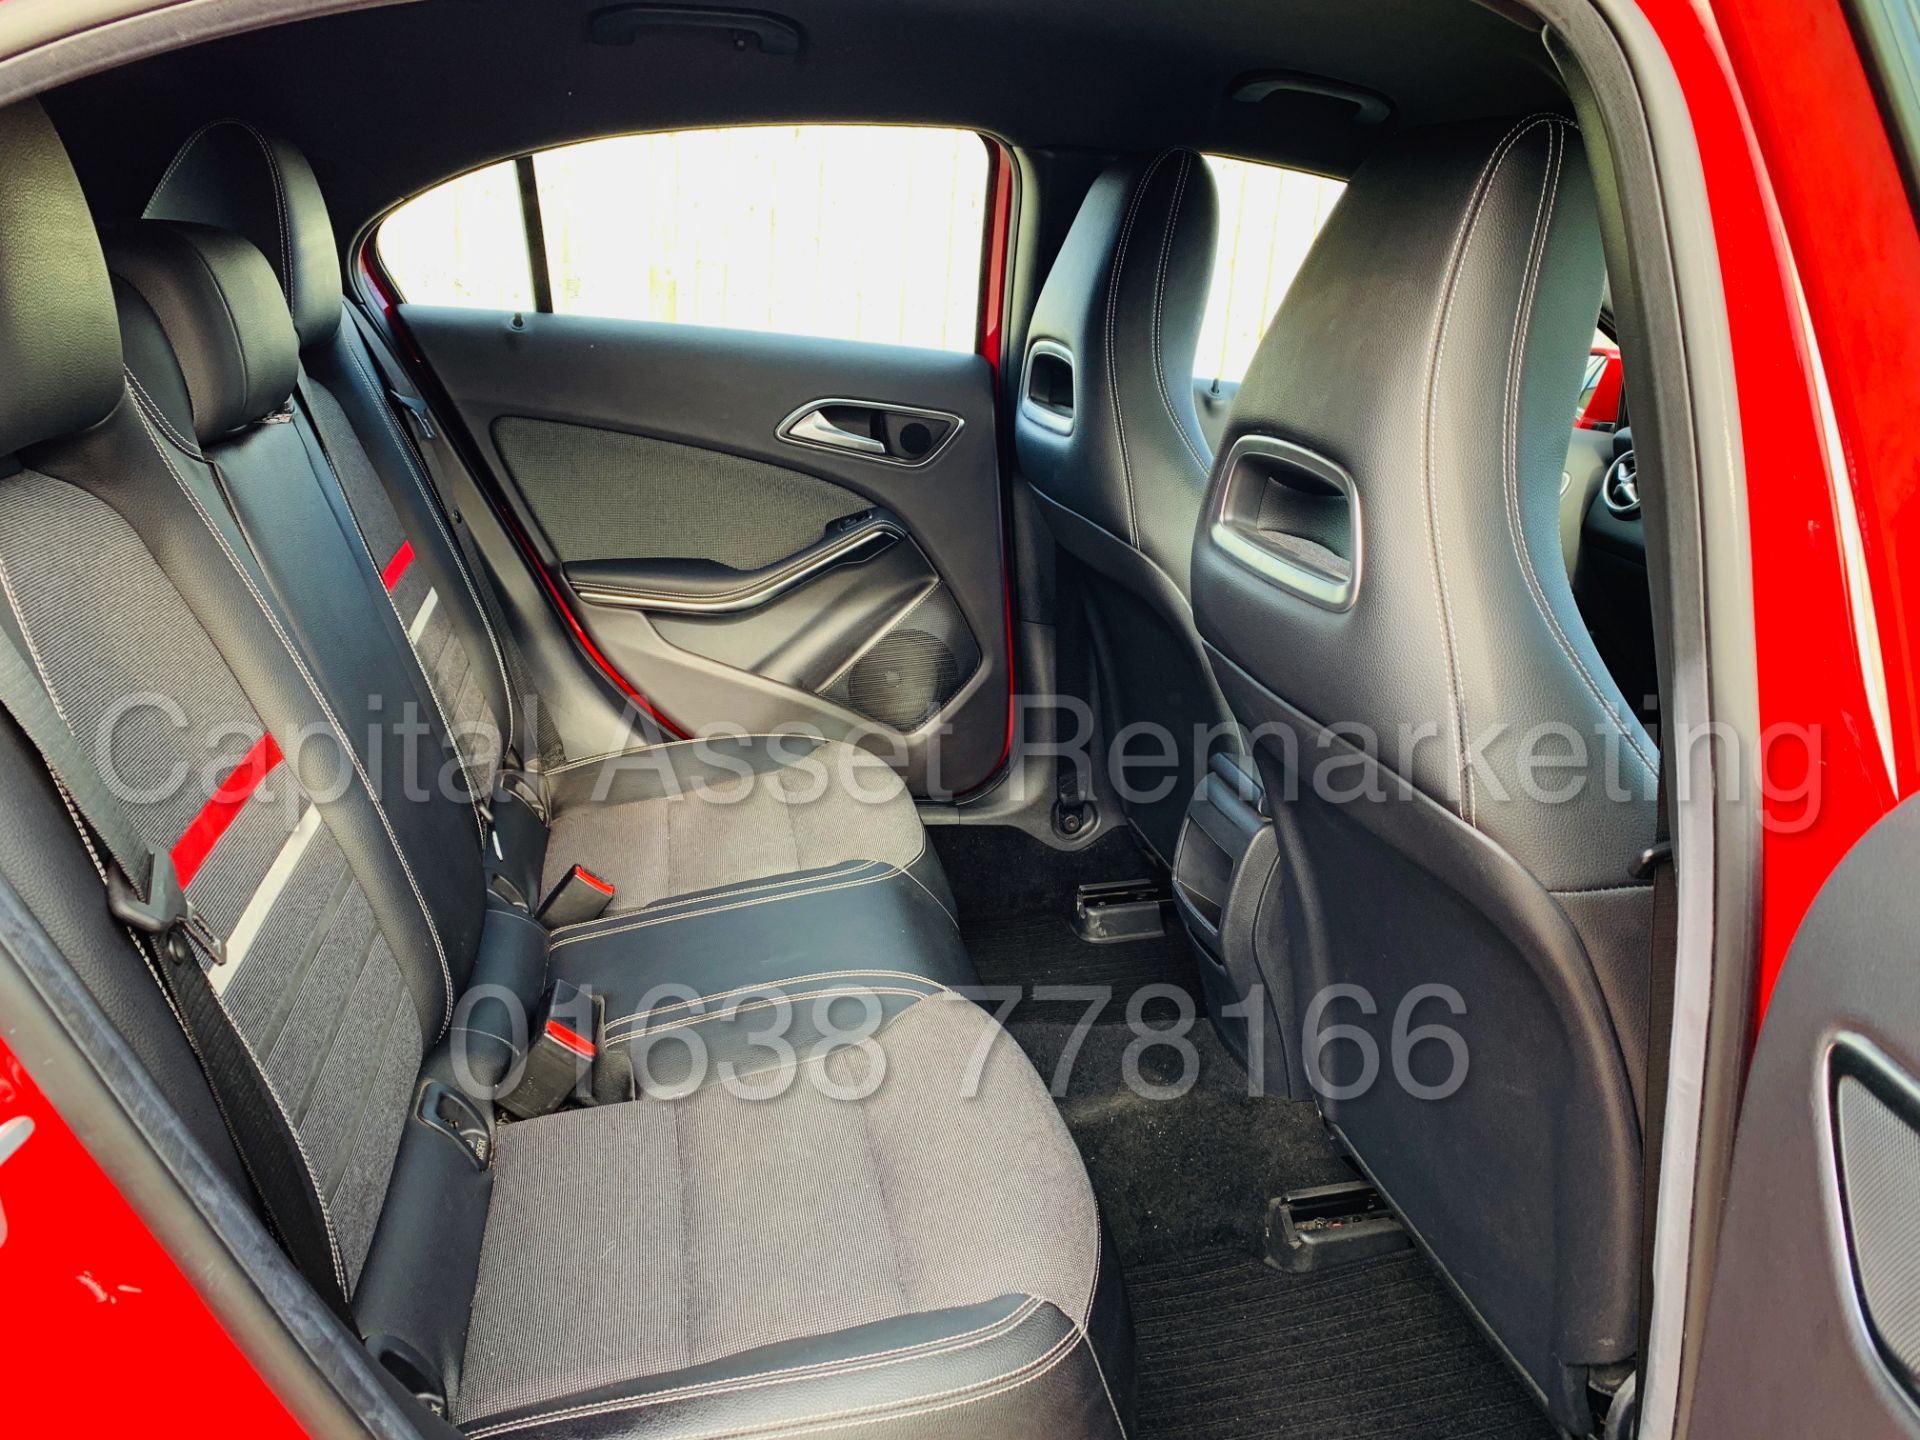 (ON SALE) MERCEDES-BENZ A180 *5 DOOR HATCHBACK* (2015 - NEW MODEL) '1.5 CDI - 7-G TRONIC AUTO' - Image 25 of 43